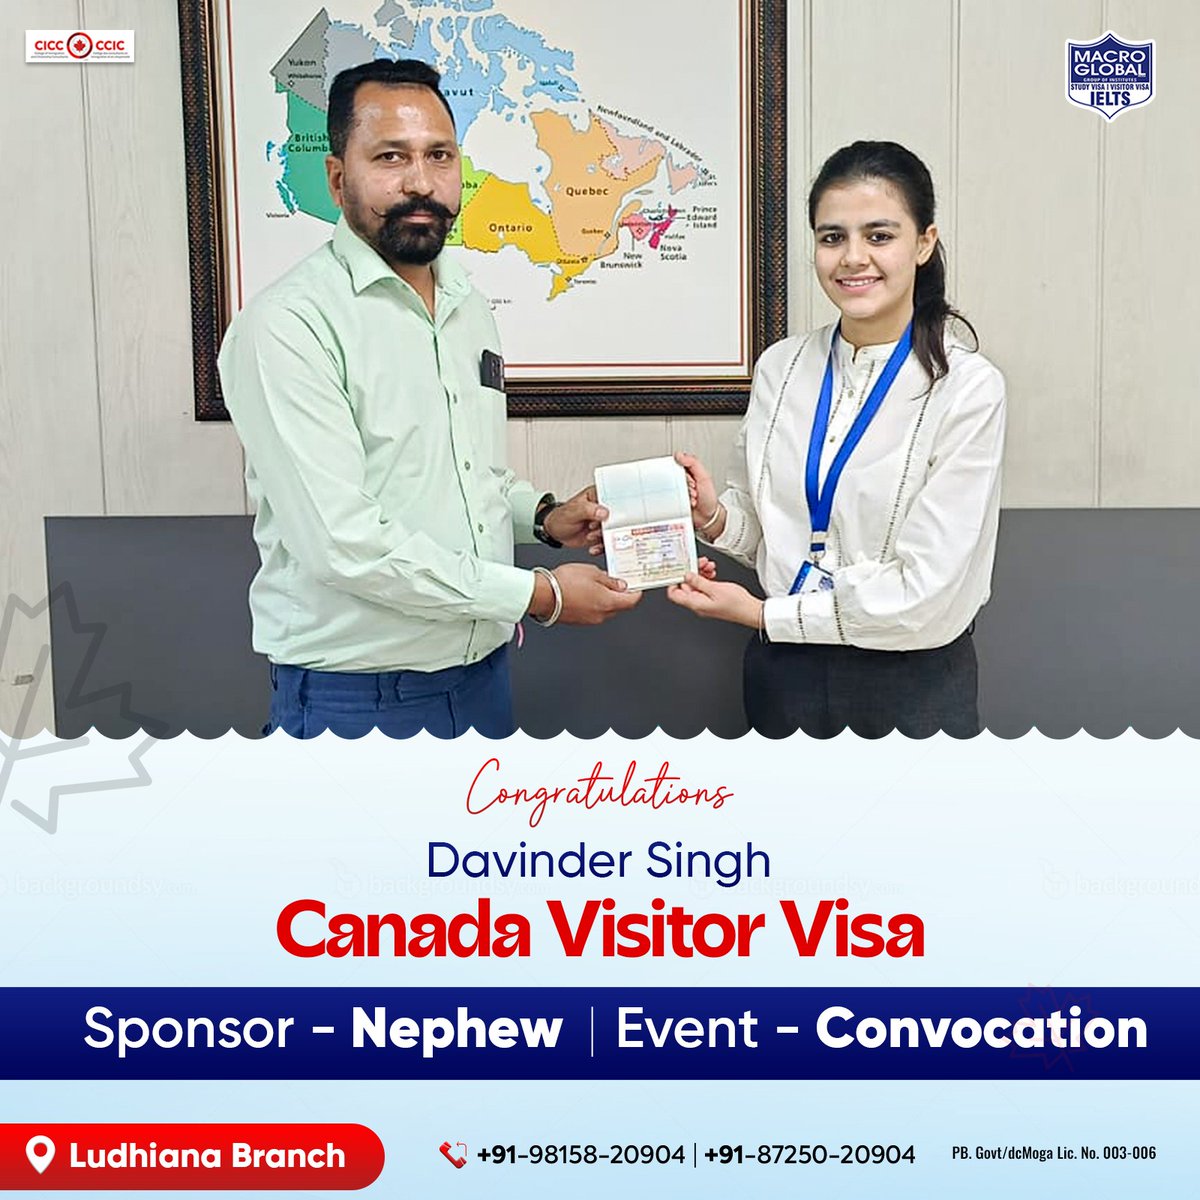 Kudos to Davinder Singh for his Canada Visitor Visa approval through Macro Global, Sponsored by his nephew for the convocation.

#MacroGlobal #GurmilapSinghDalla #Canada #Canadastudyvisa #canadaopenworkpermit #spousevisa #Visitorvisa #Visa #IELTS #EnrollNow #Immigration